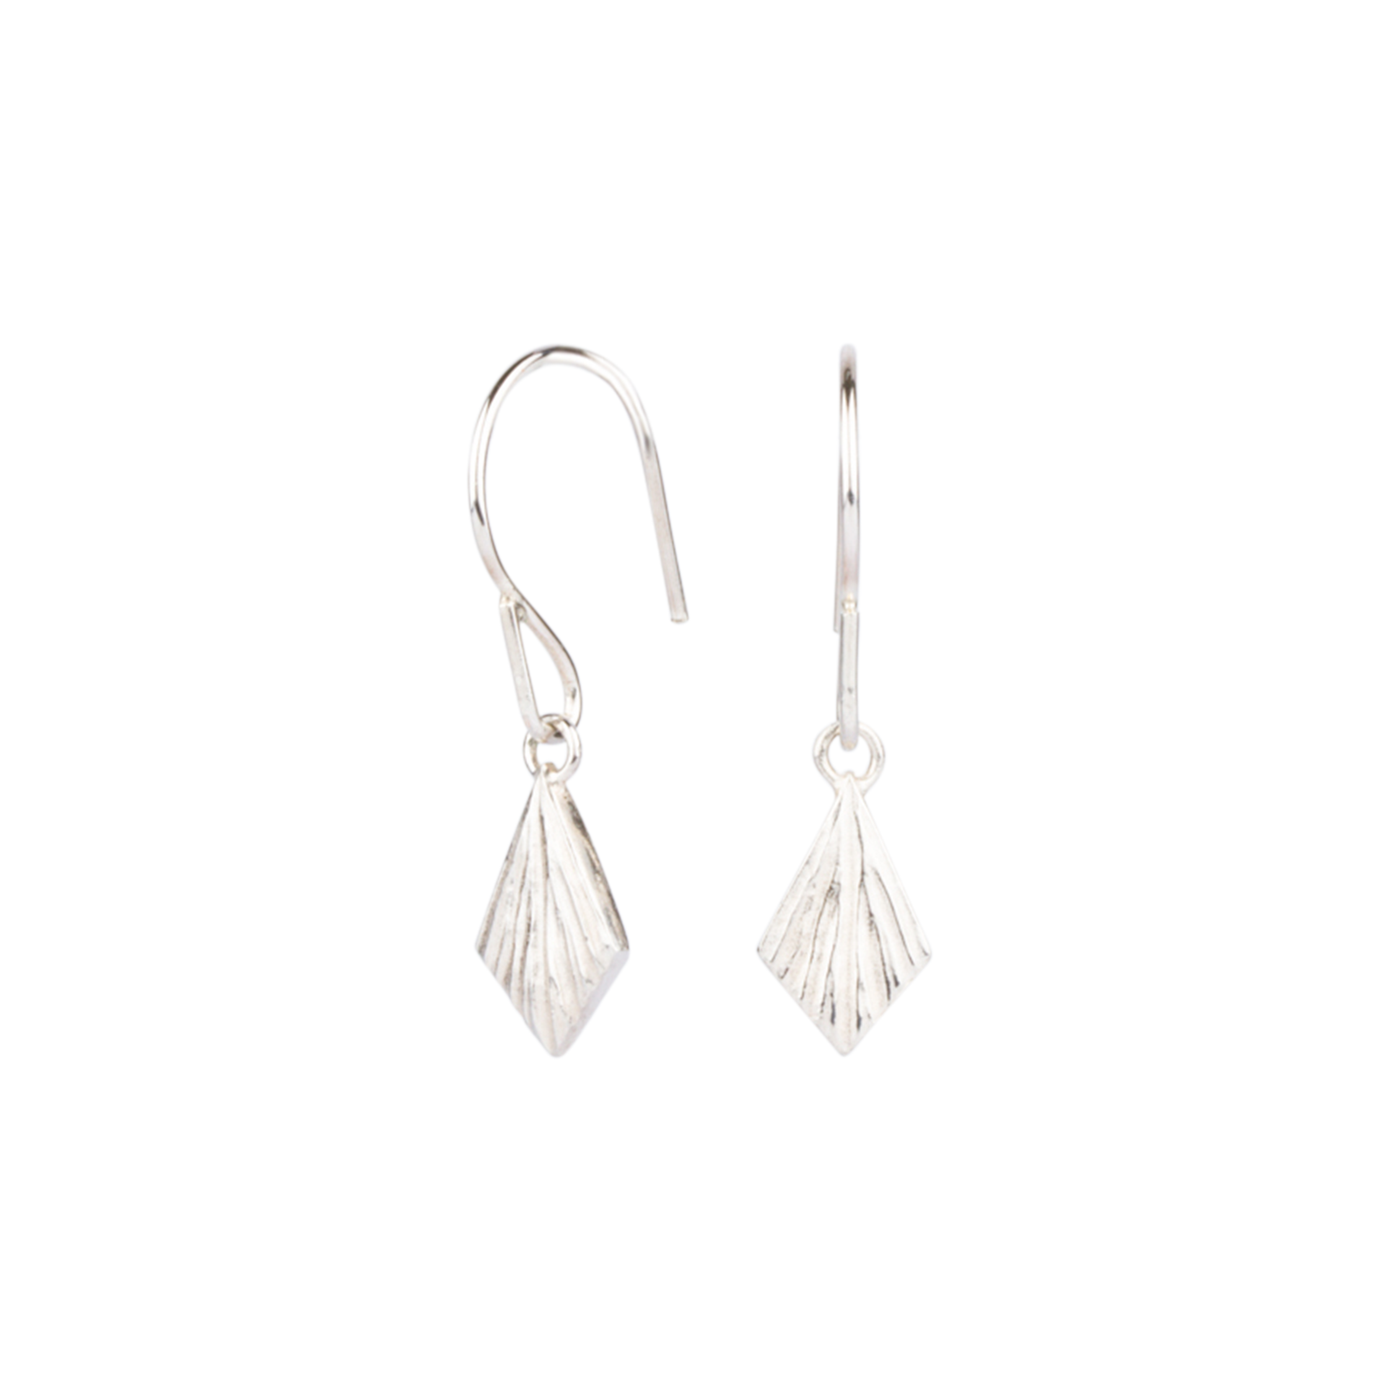 Silver Flame Dangle Earrings by Corey Egan side view on a white background